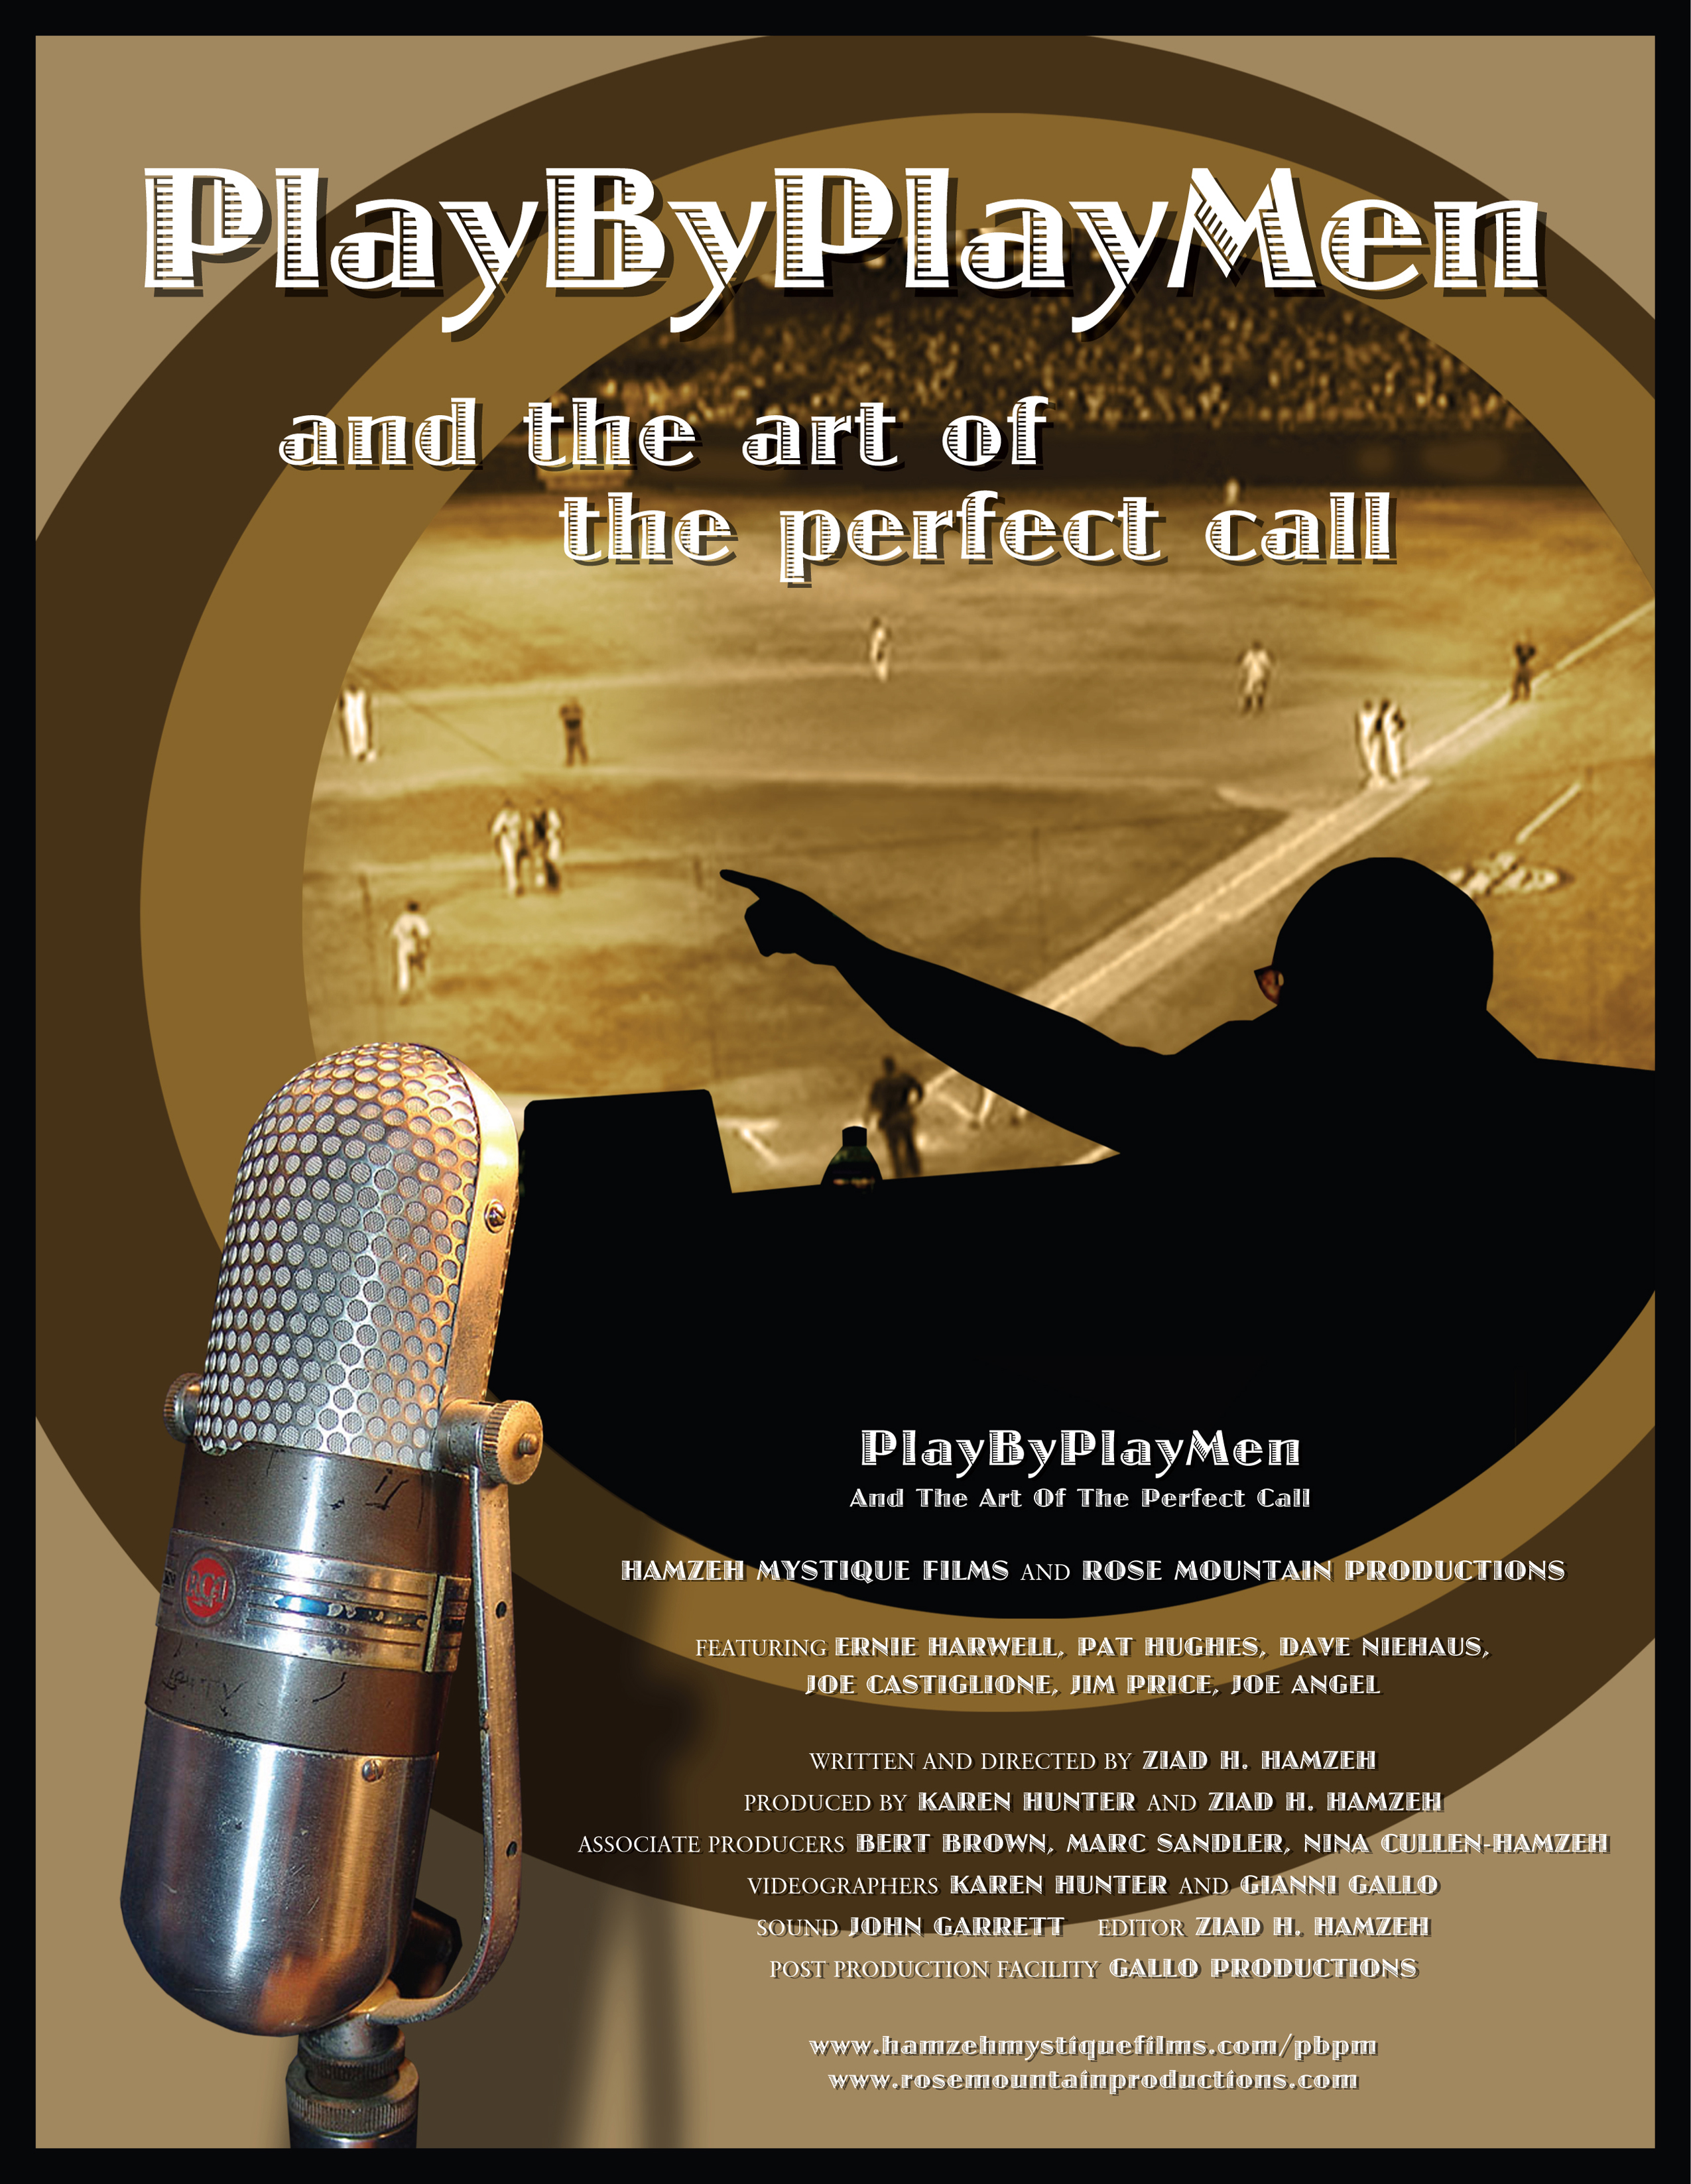 Playbyplaymen and the Art of the Perfect Call movie